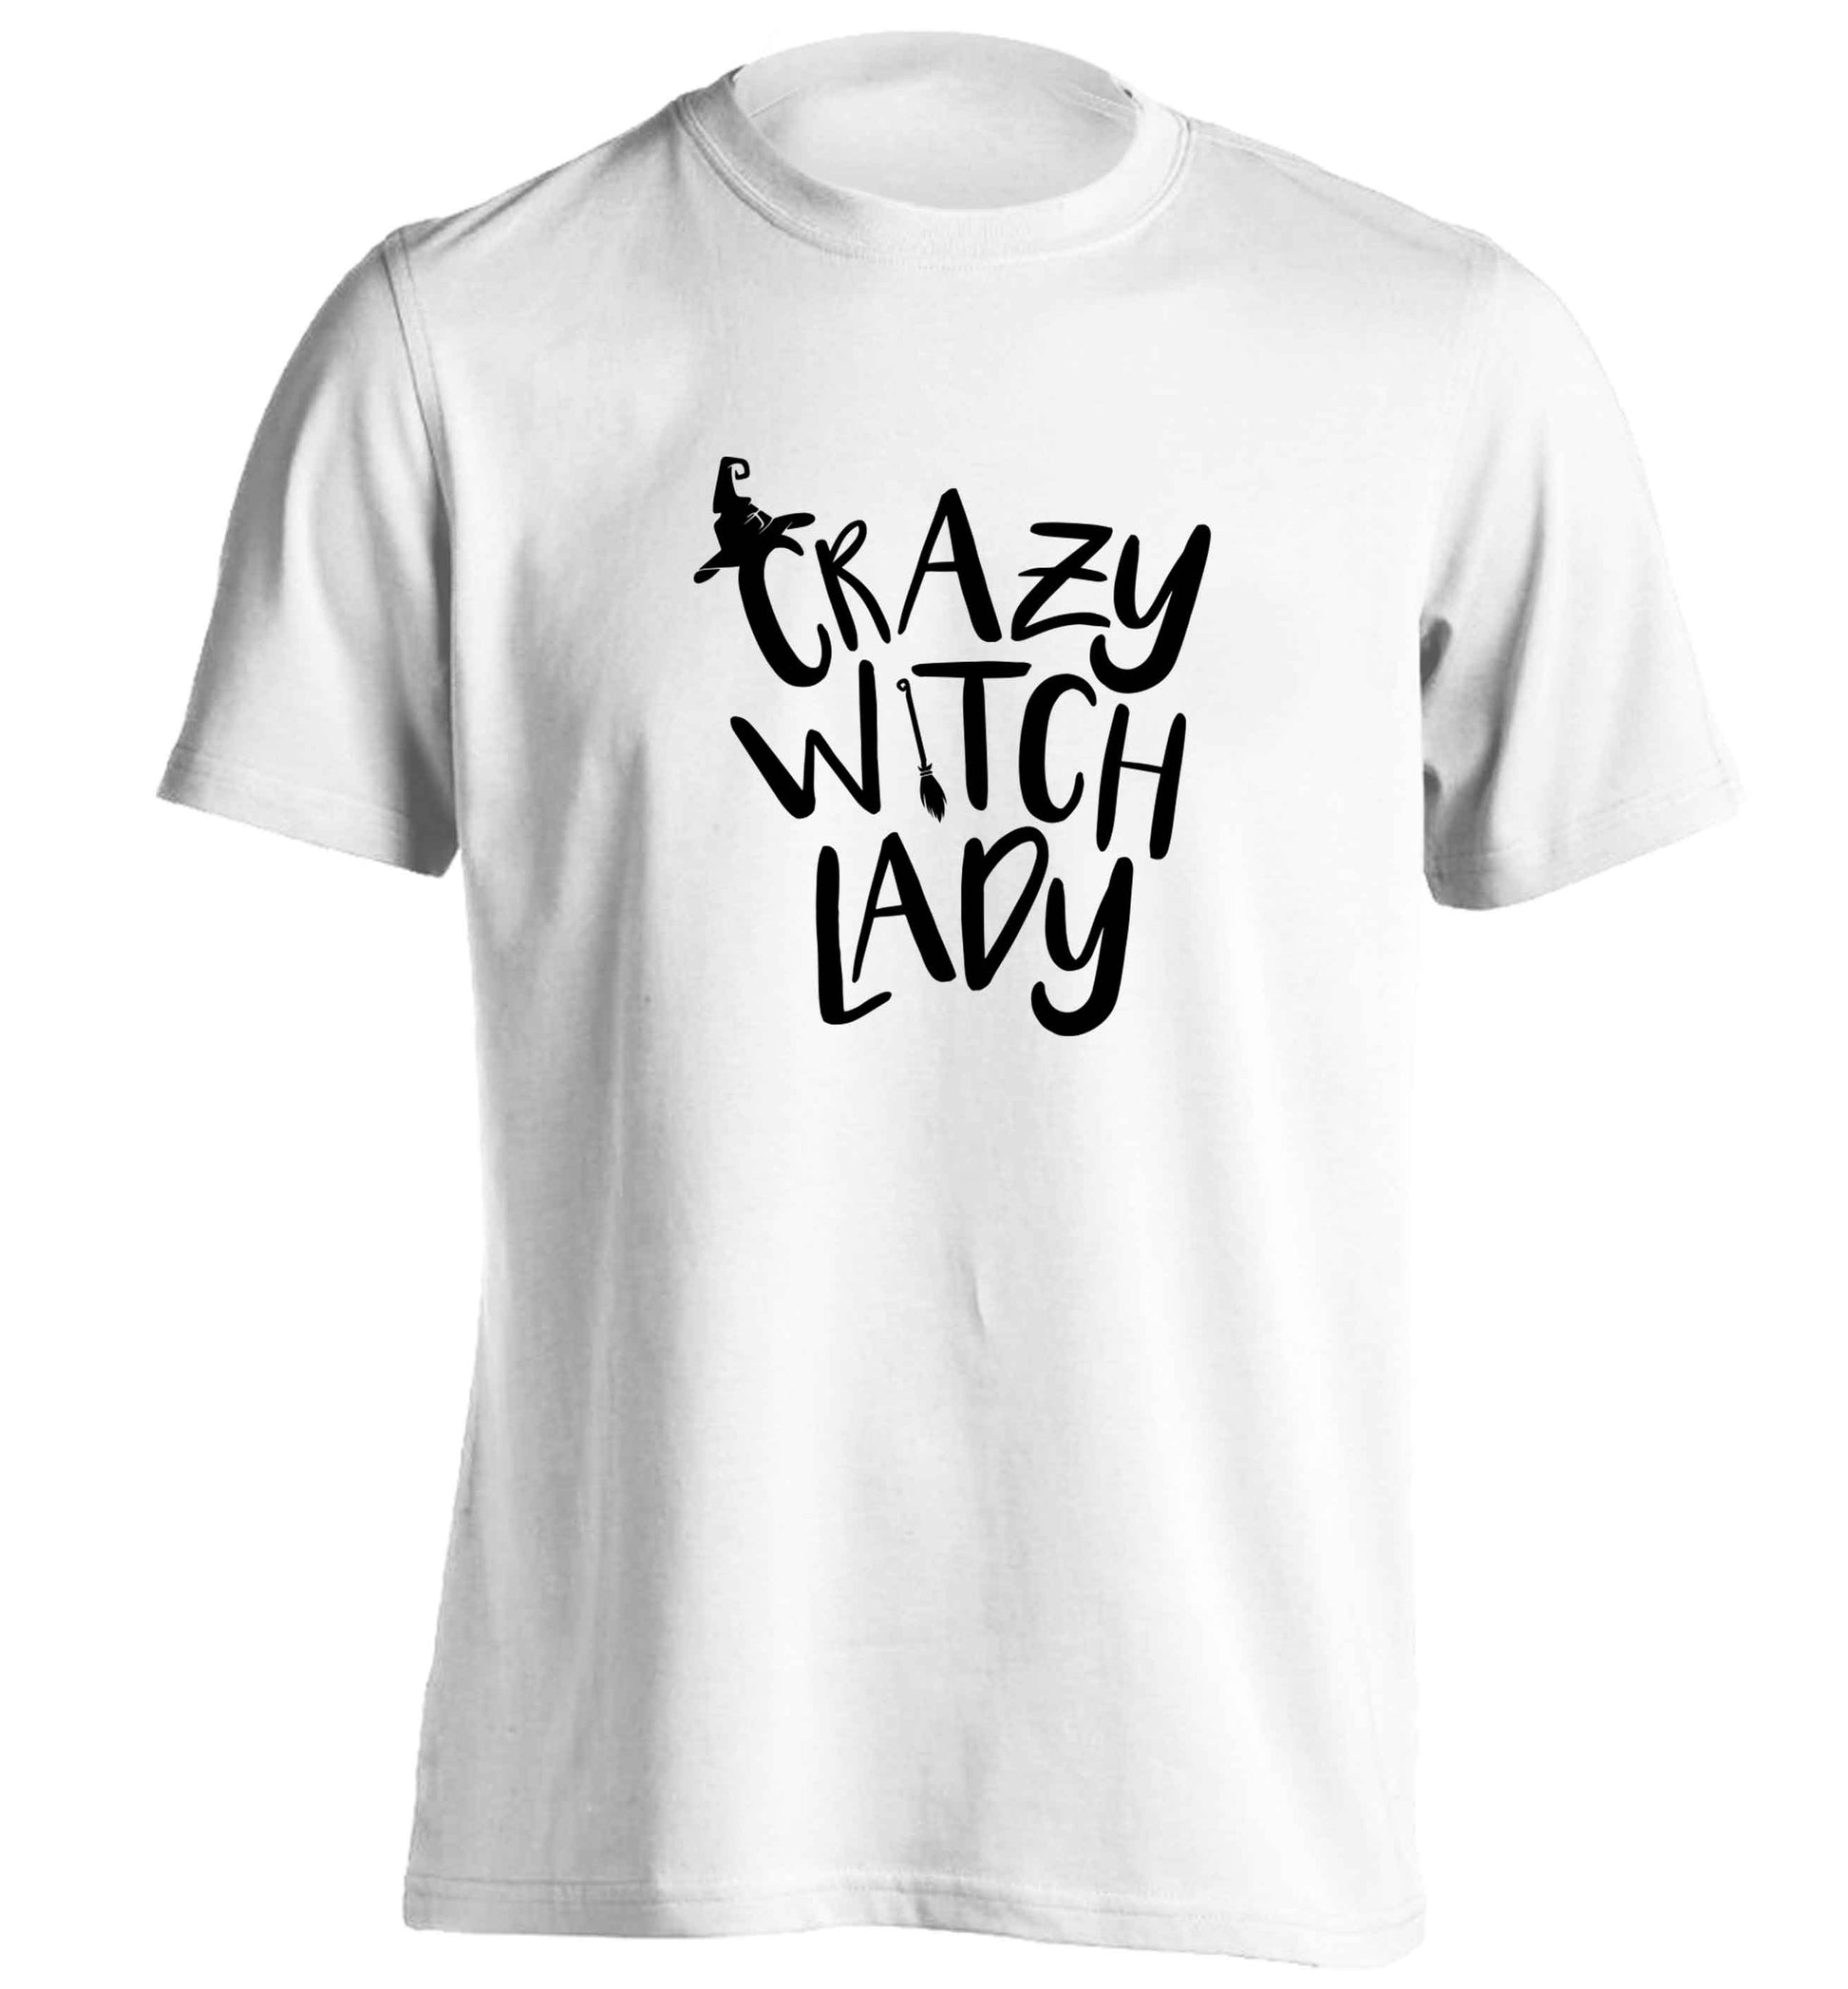 Crazy witch lady adults unisex white Tshirt 2XL